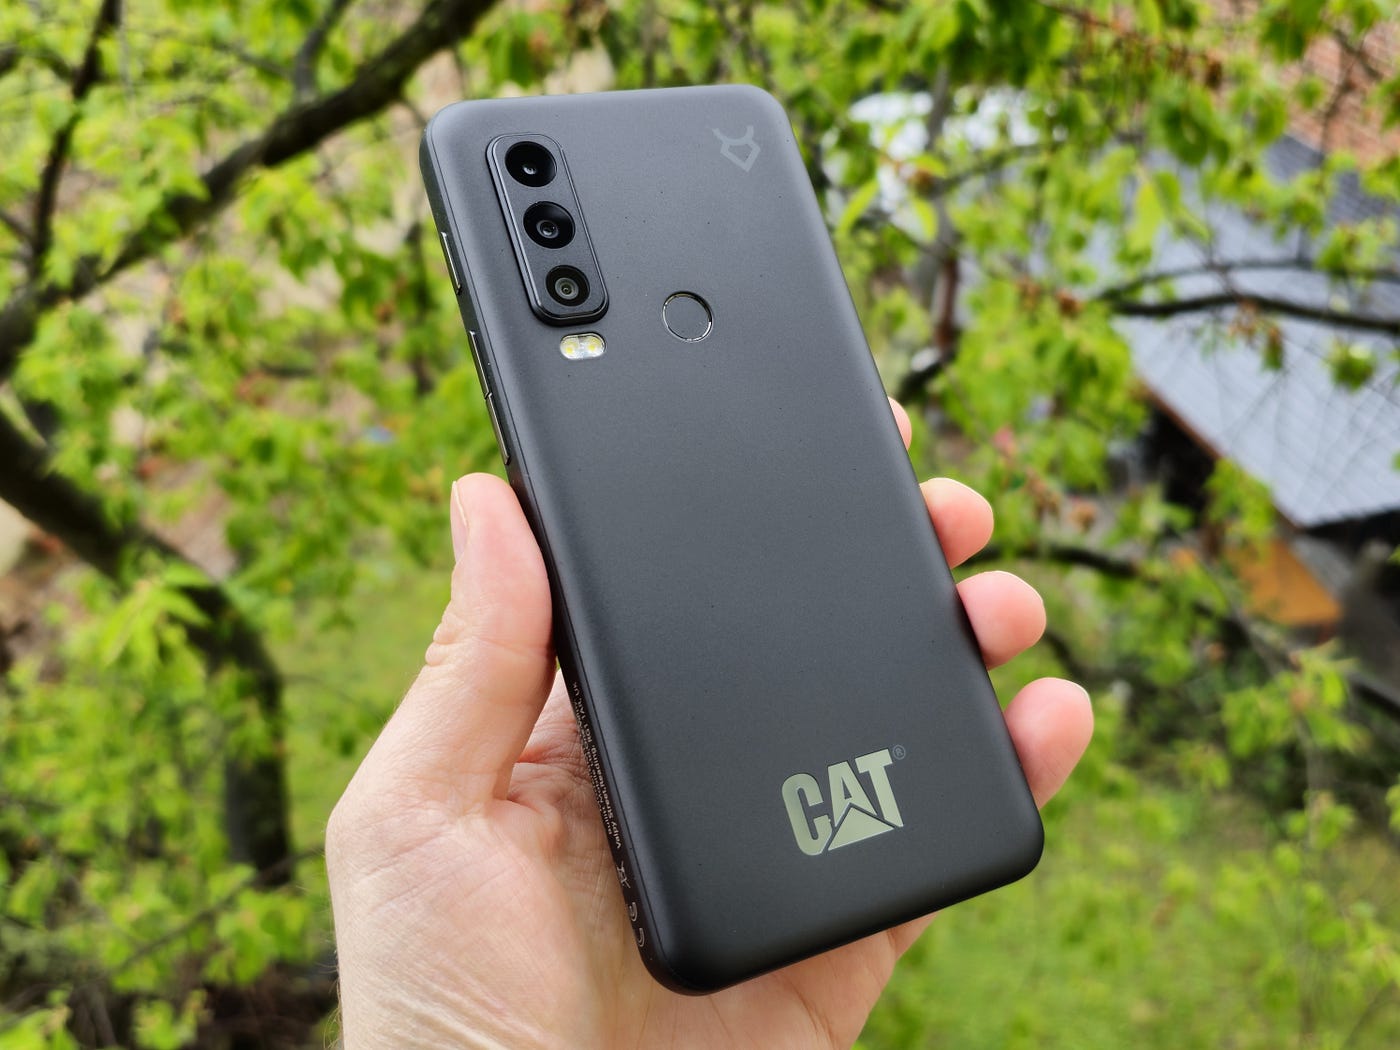 My Incredible Experience with the Cat S75, by Benjamin